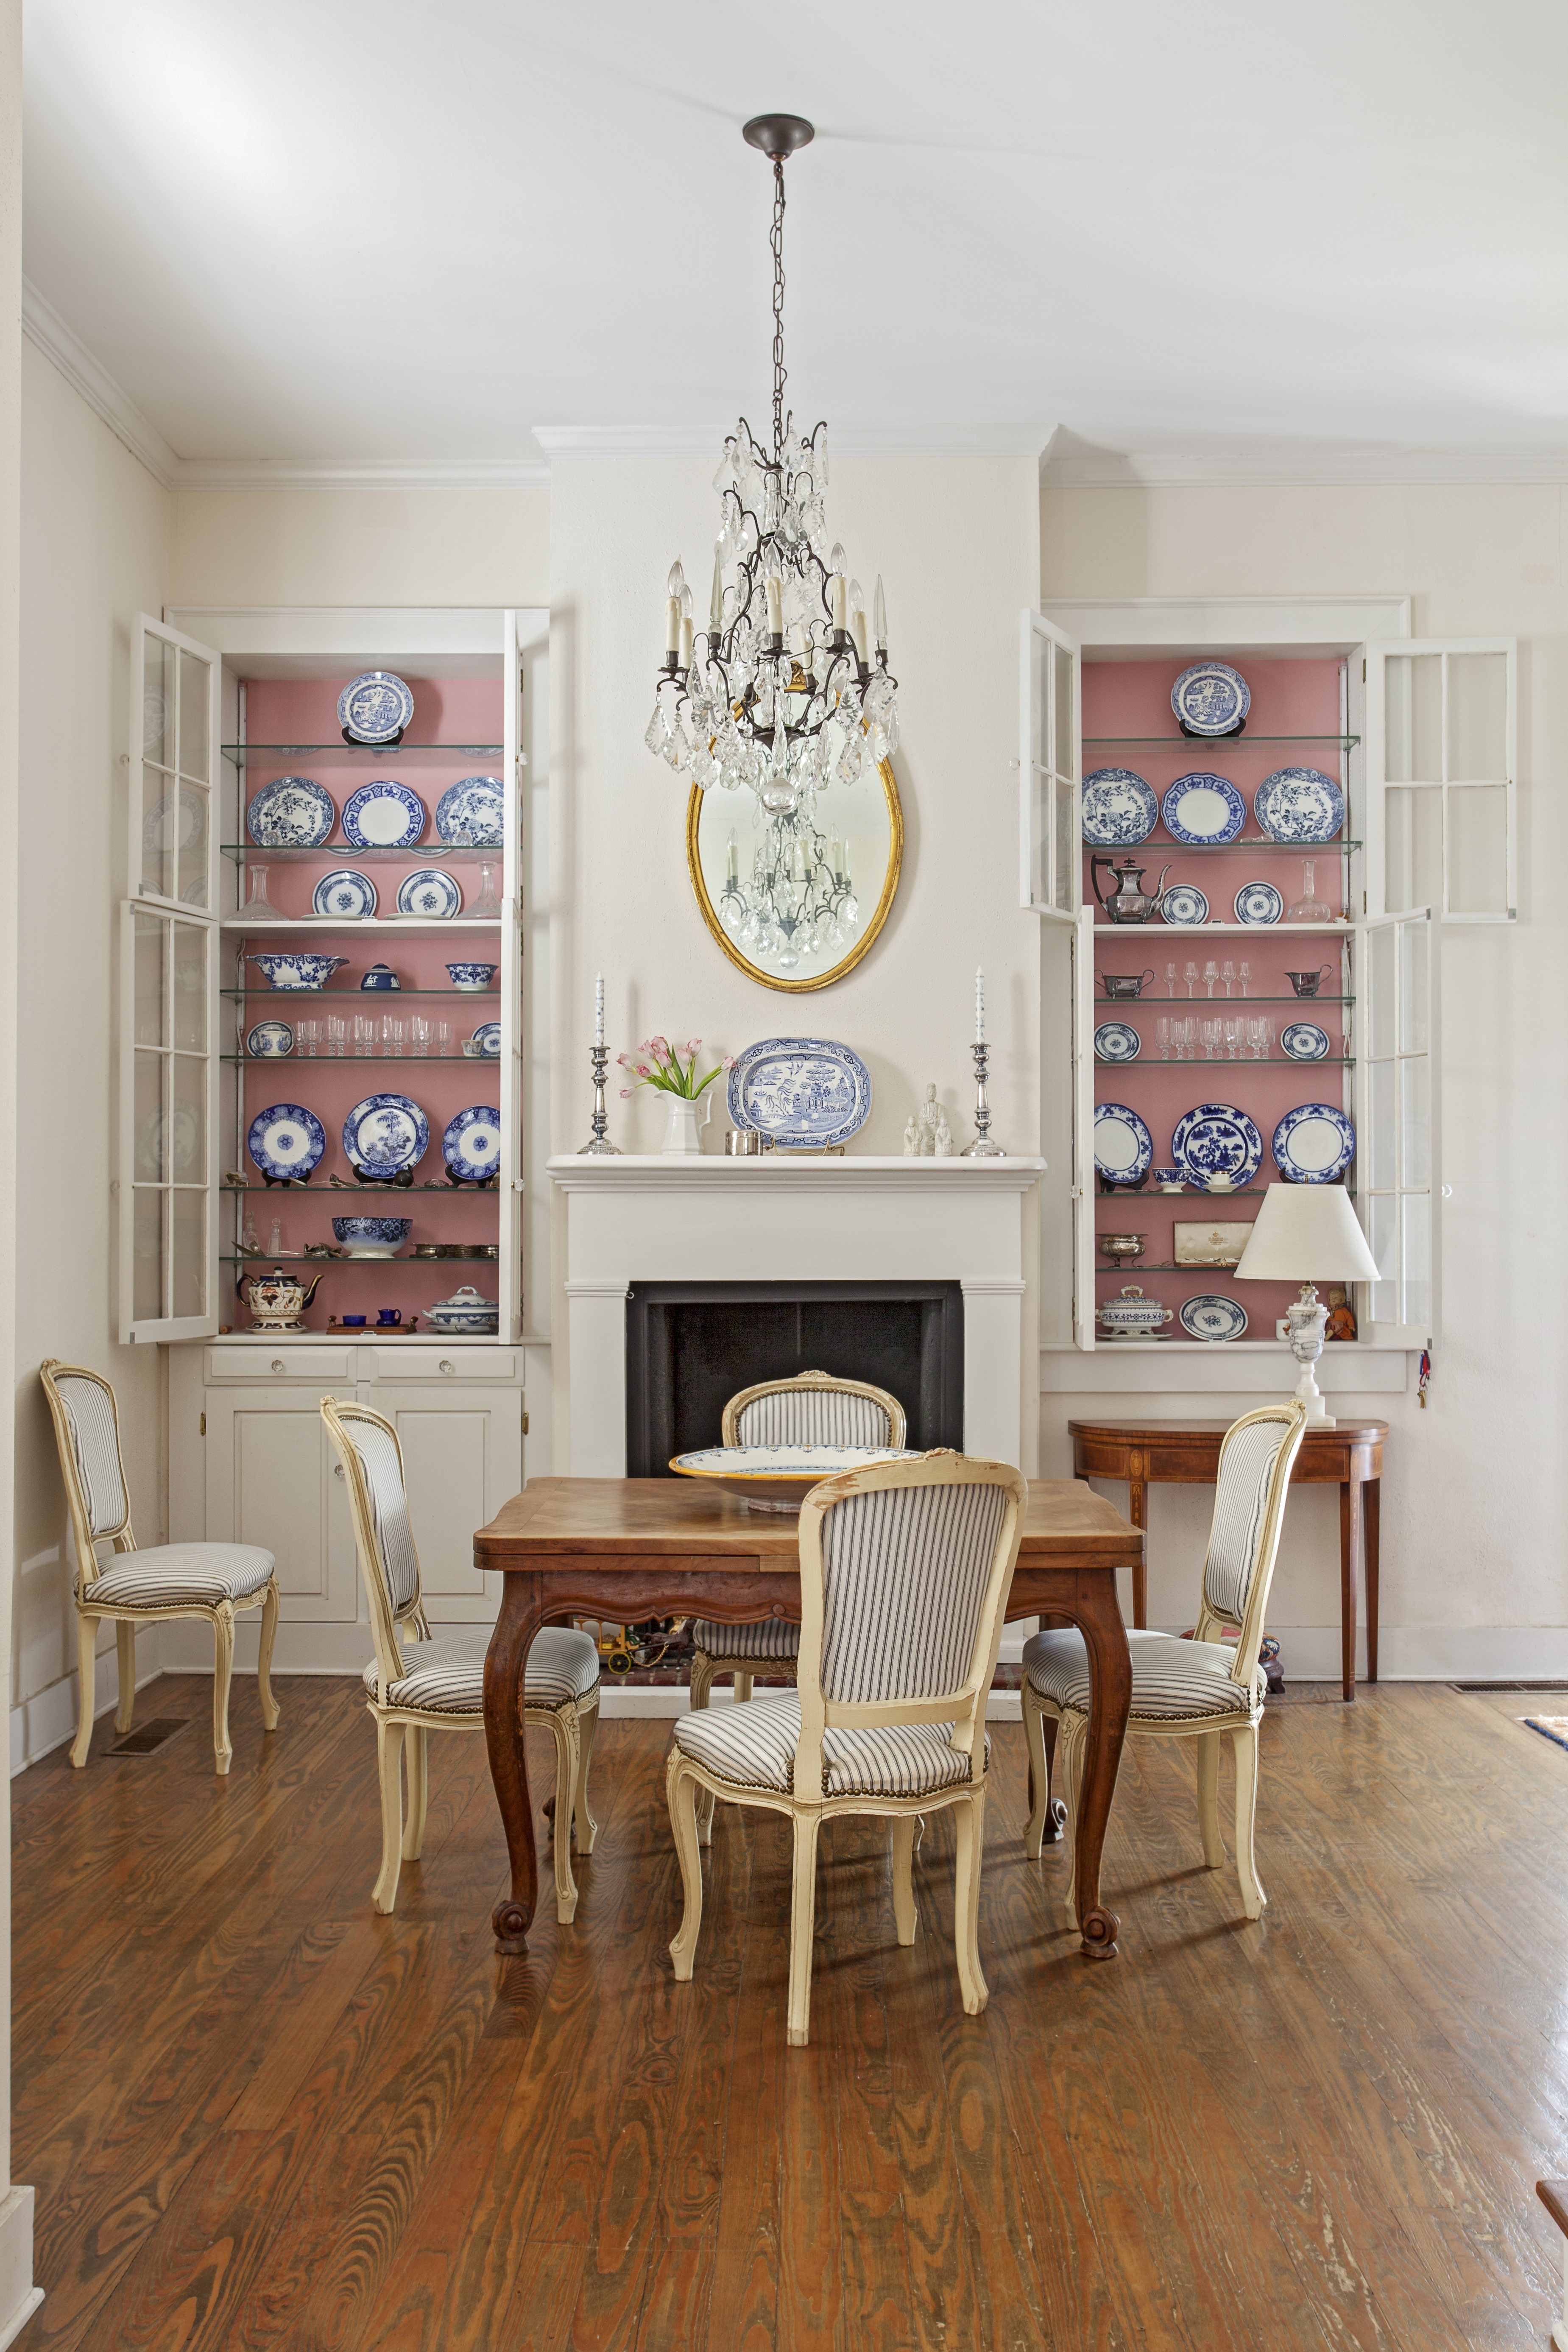 Display of Affection: Beloved collections of china (including Flow Blue and Blue Willow pieces) are on display in the dining room. Bigner added ticking to these chairs to balance their elegant shape with a more casual, inviting vibe.